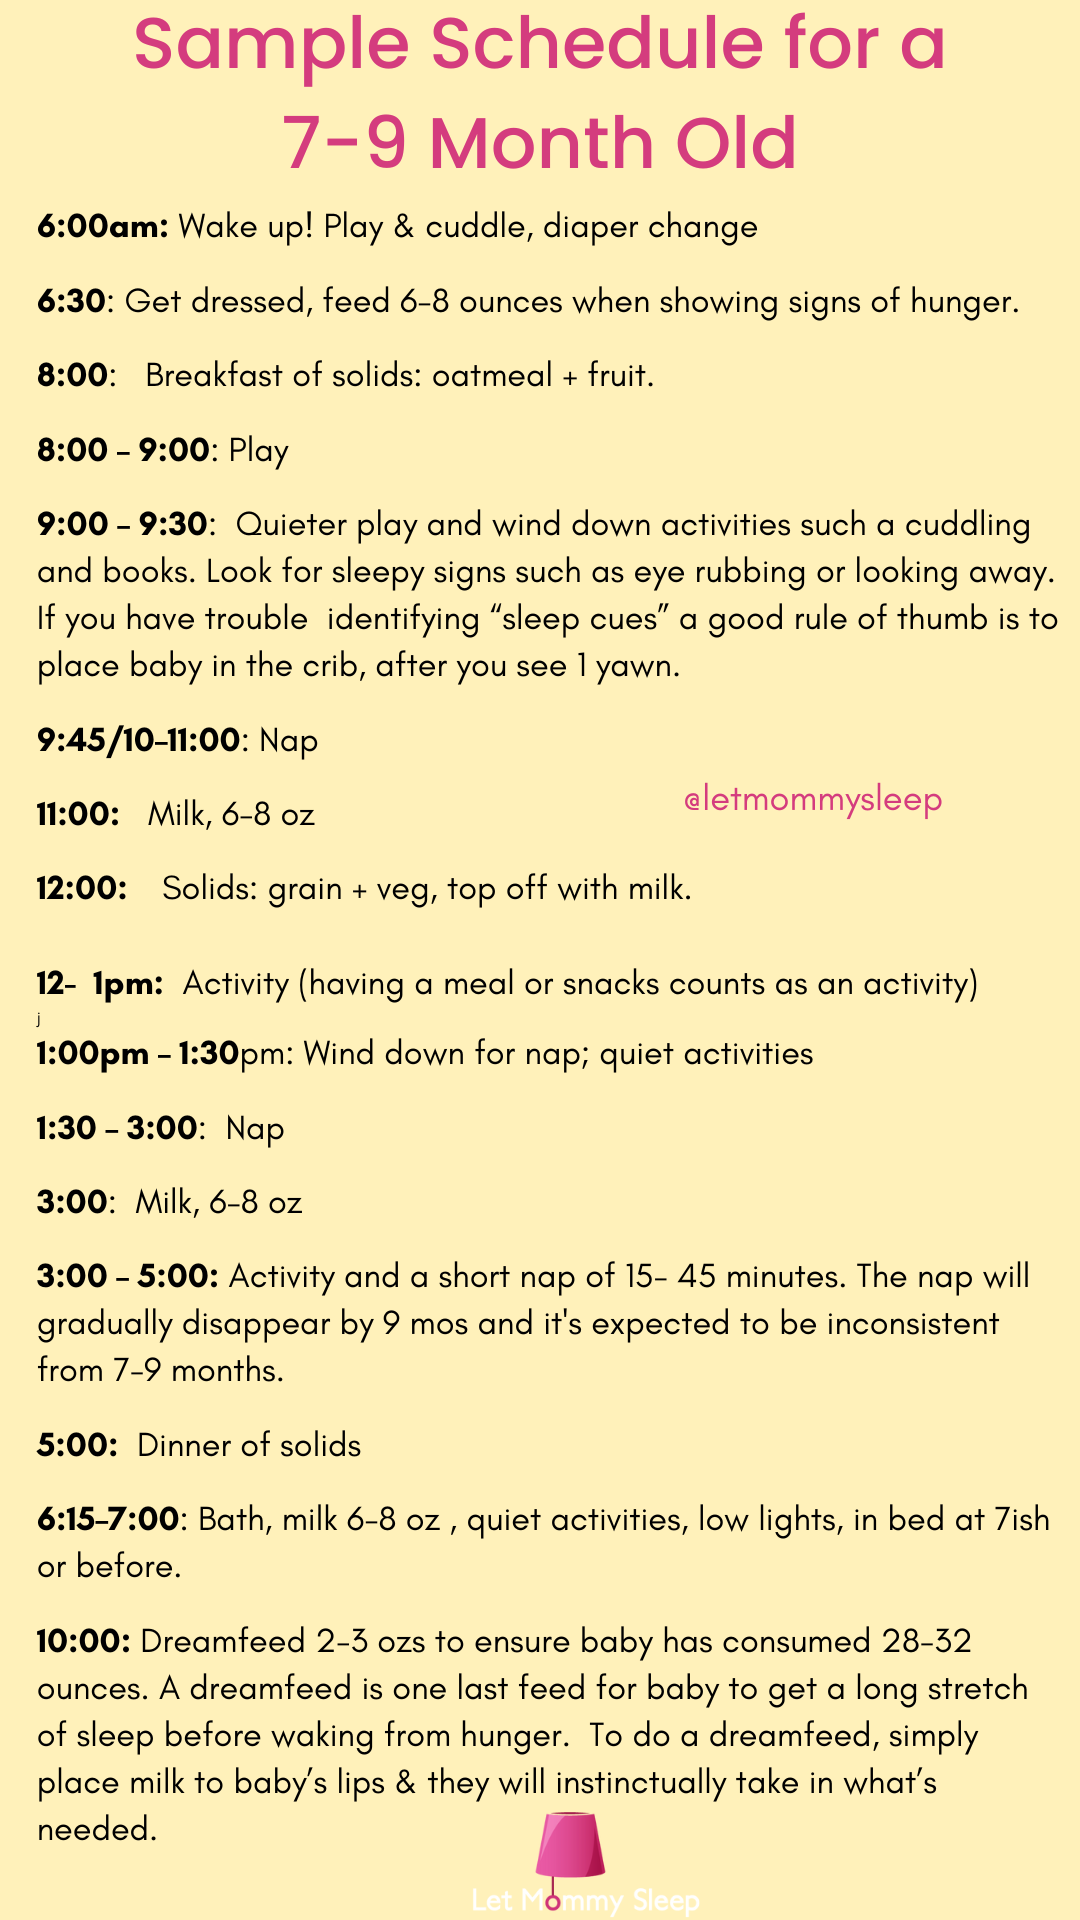 Infant Sleep Schedule for a 7-9 Month Old - Let Mommy Sleep Blog